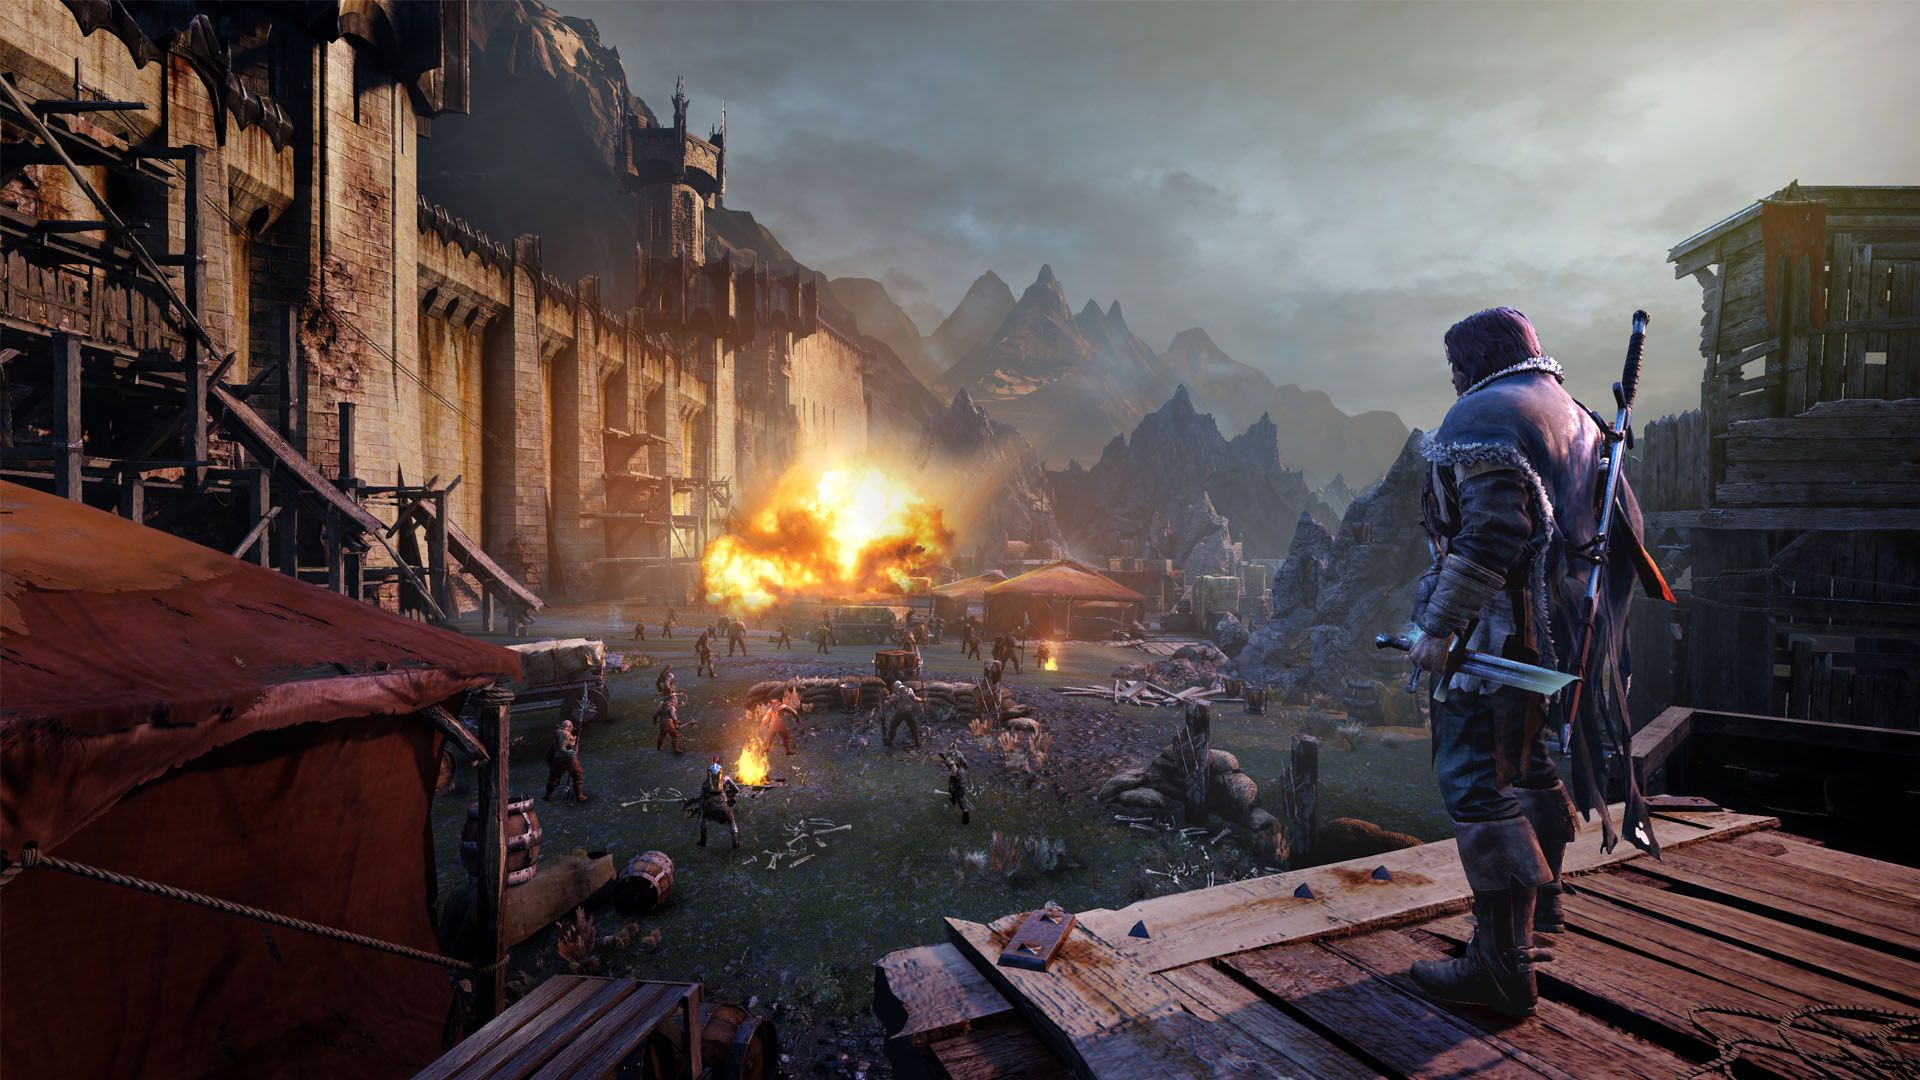 Middle-earth: Shadow of Mordor - Captain of the Watch Character Skin Featured Screenshot #1